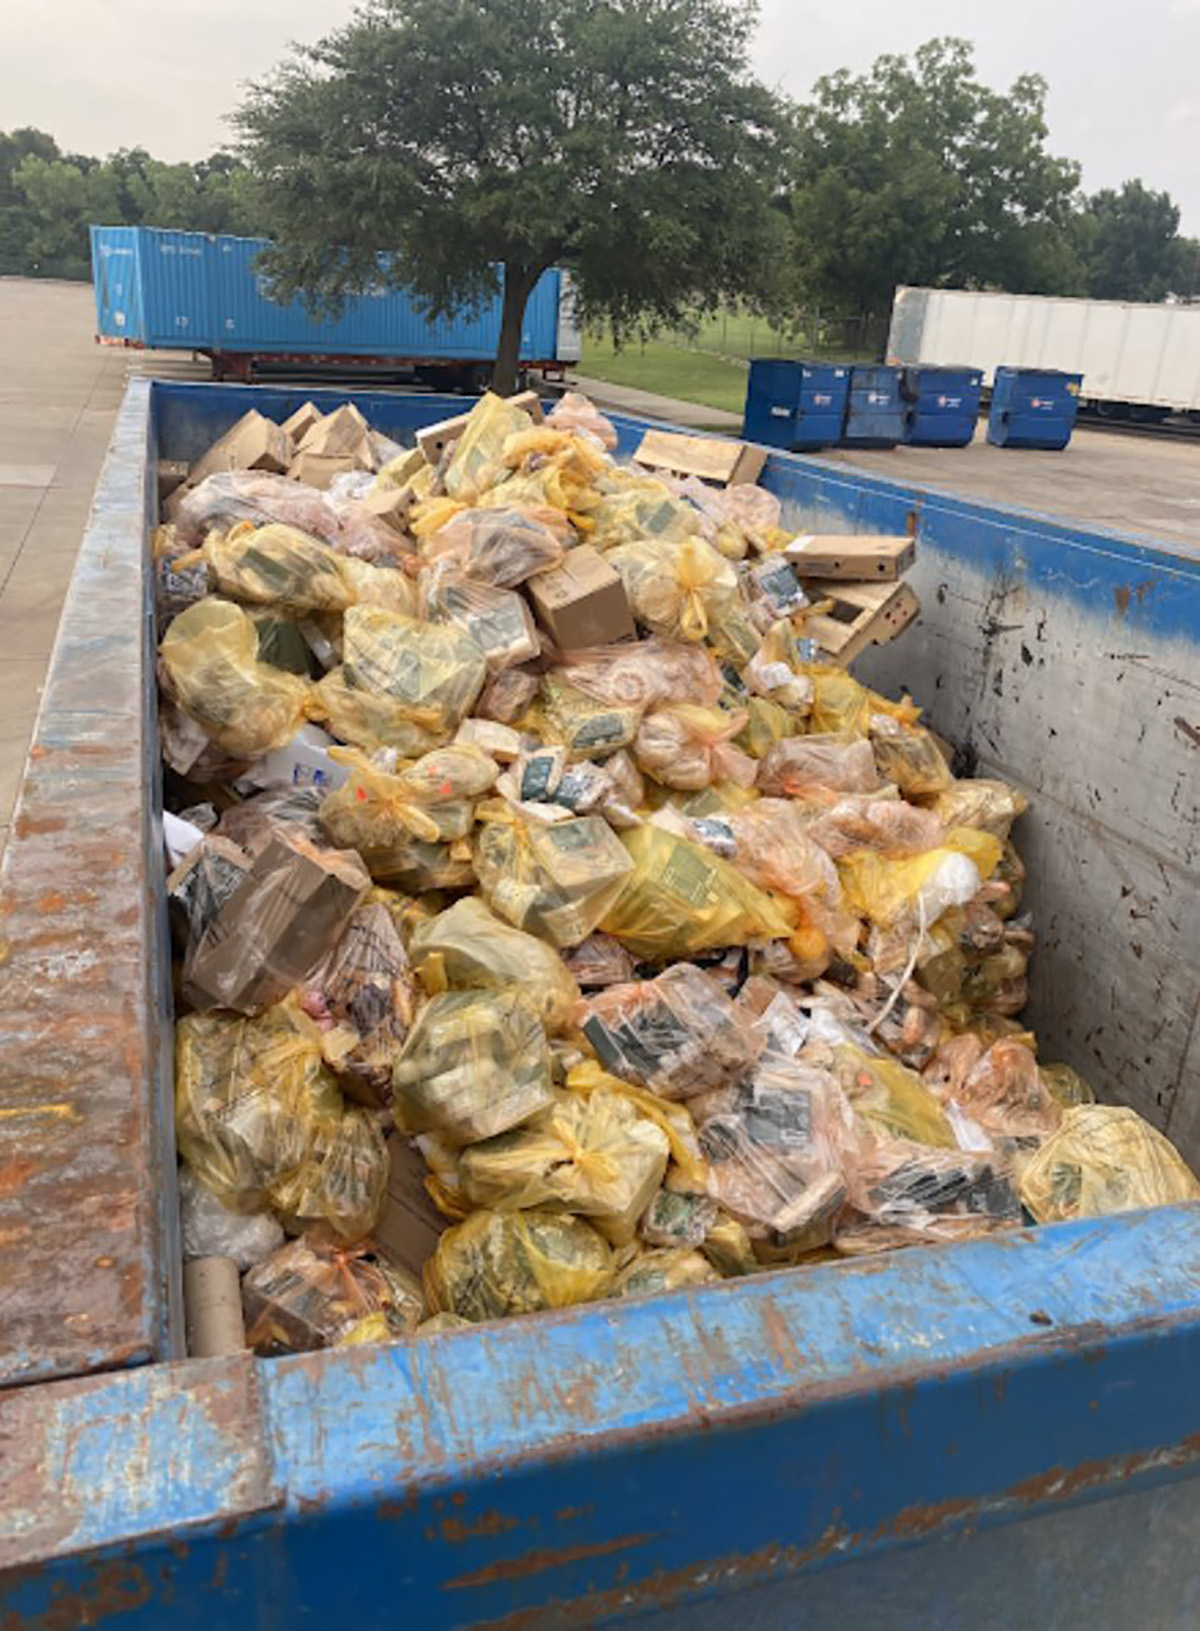 A tweet from Laila Dalton said that food-share or FoodShare bags that Starbucks supposedly donates were found in a blue garbage dumpster in Grand Prairie, Texas.